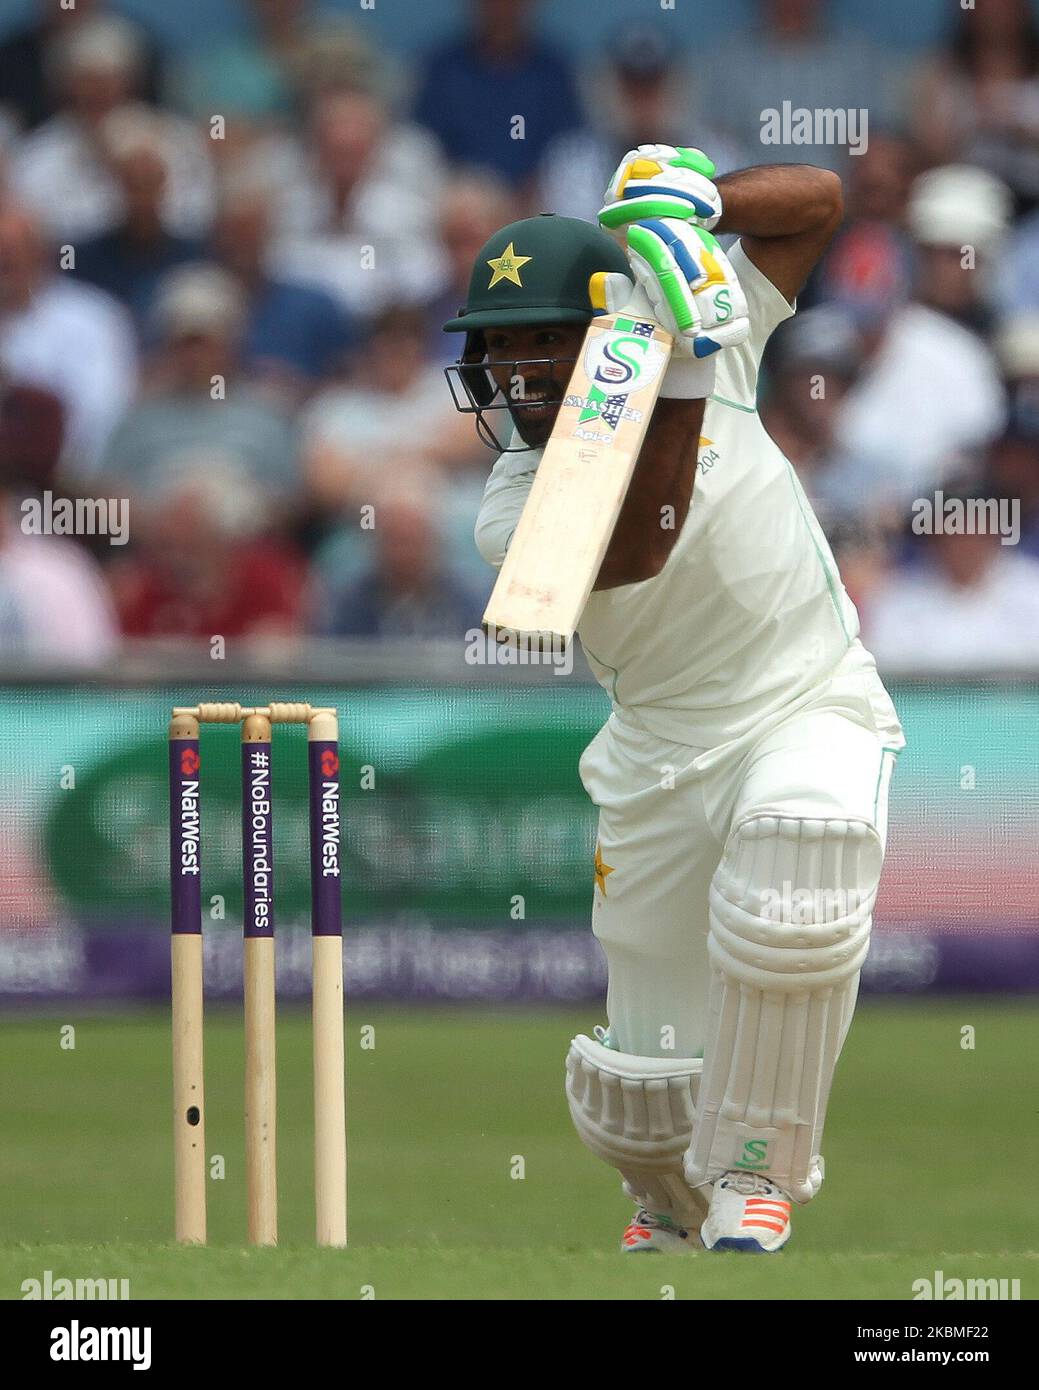 Pakistan's Asad Shafiq batting during the first day of the Second Nat West Test match between England and Pakistan at Headingley Cricket Ground, Leeds on Friday 1st June 2018. (Photo by Mark Fletcher/MI News/NurPhoto) Stock Photo